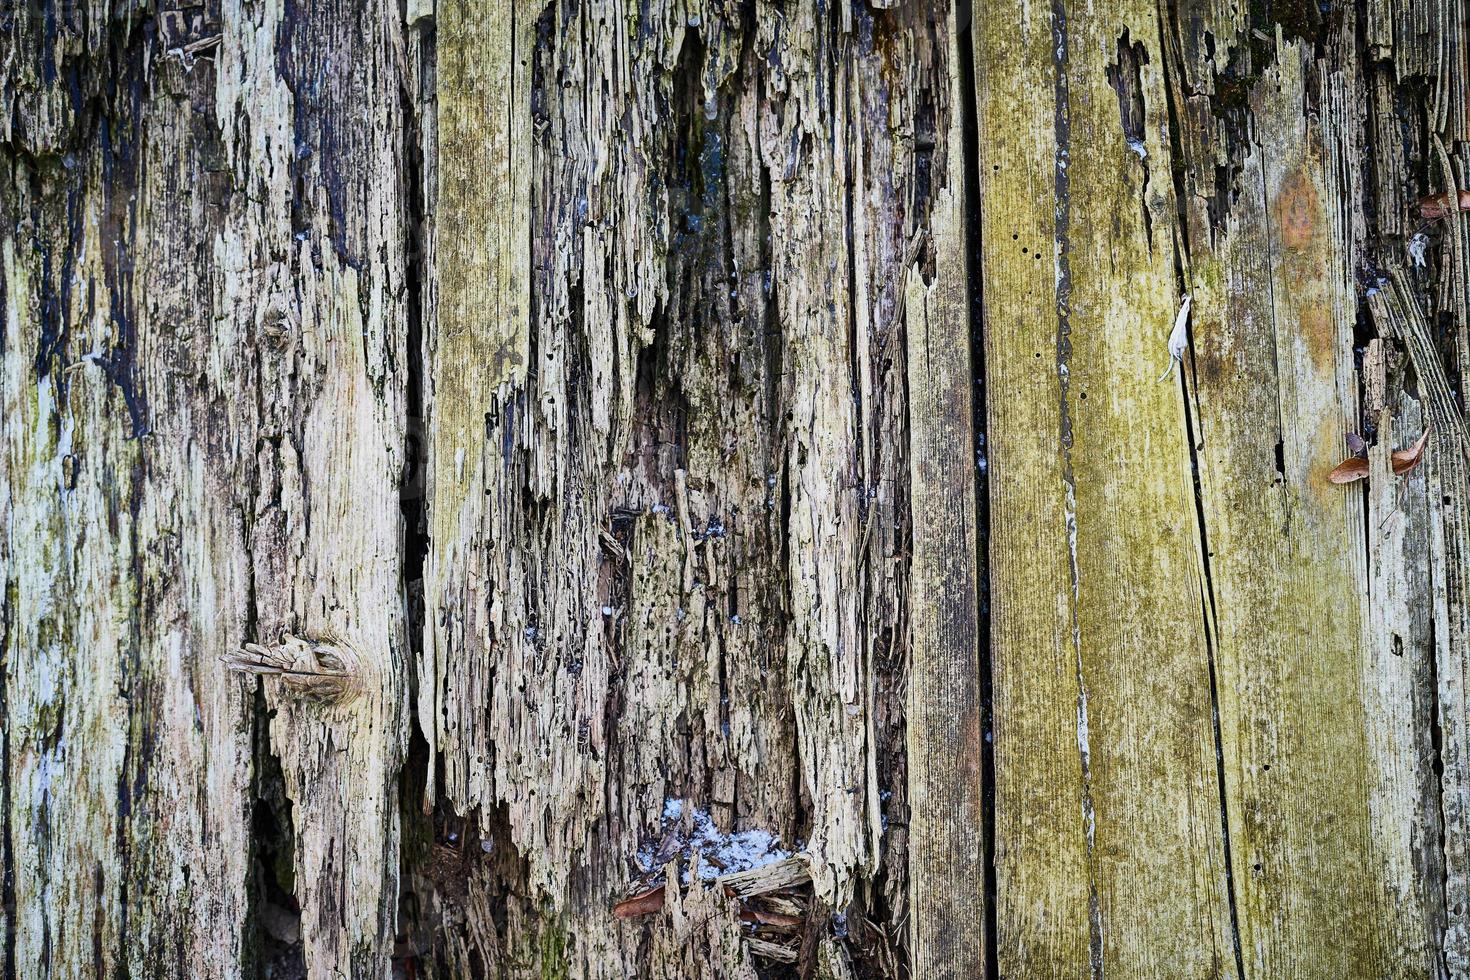 Old wood texture for web background, Rotten, decrepit, rotten wooden backdrop photo